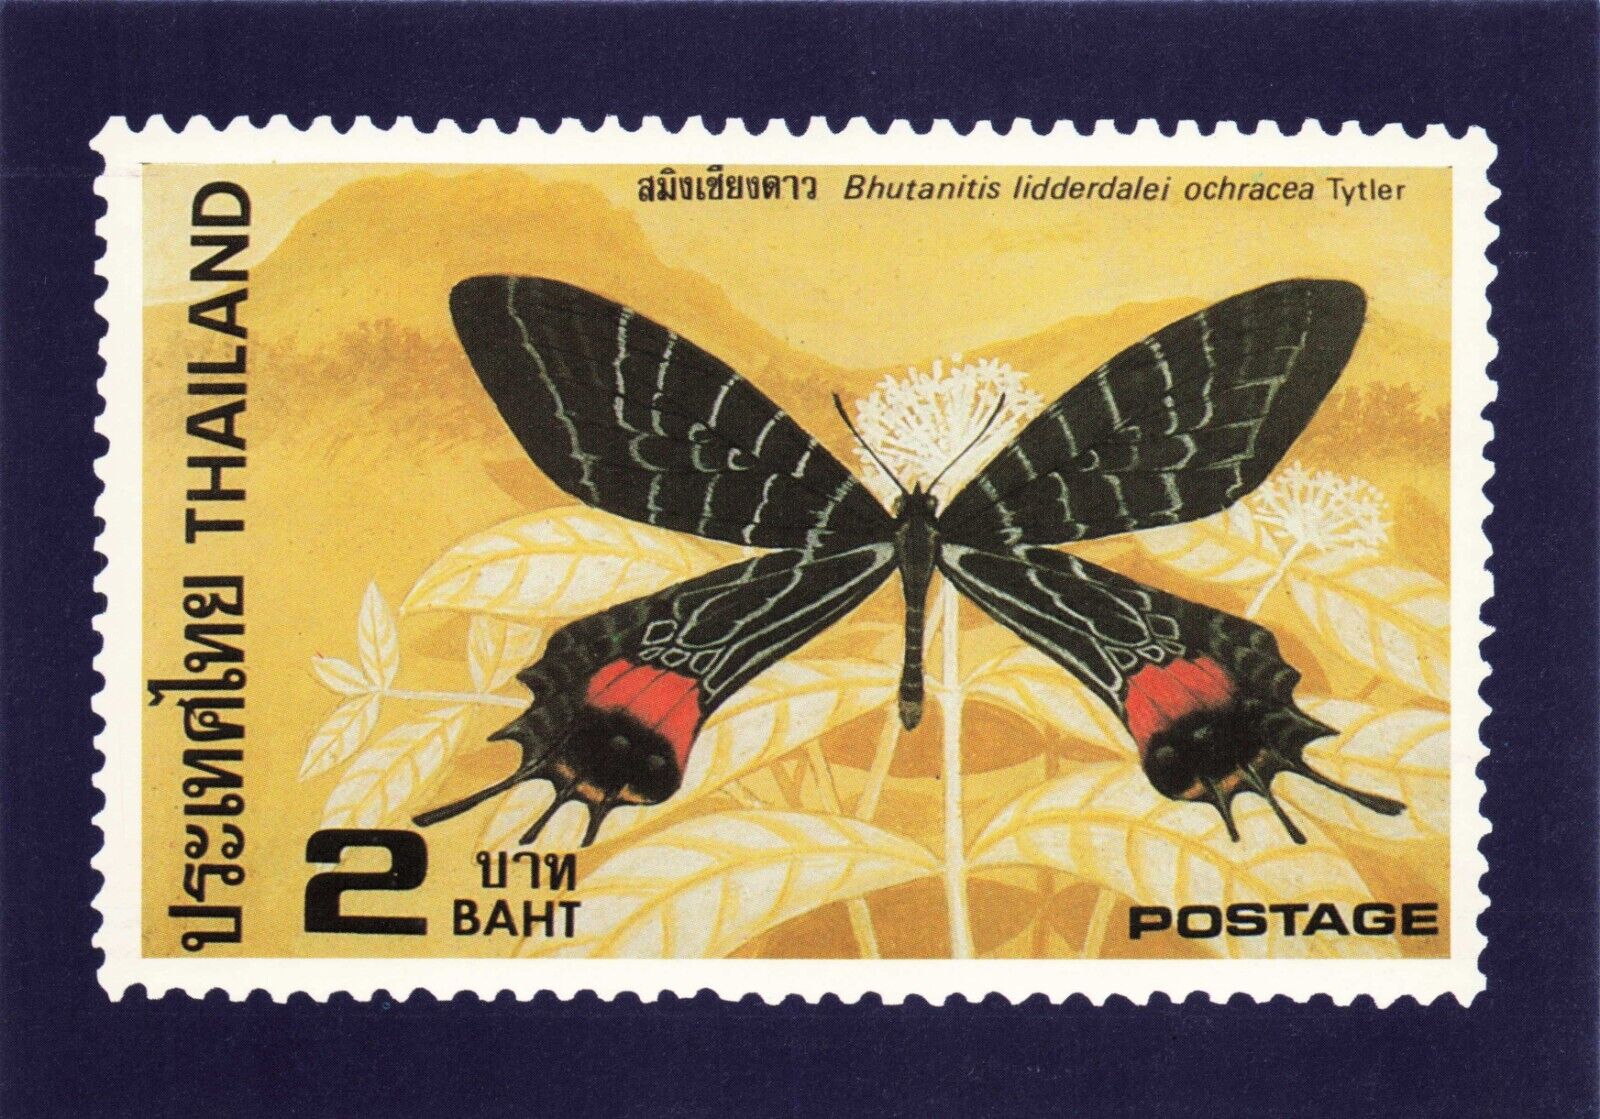 Thailand 2 Baht Stamp Swallowtail Butterfly Vintage Postcard Unposted 